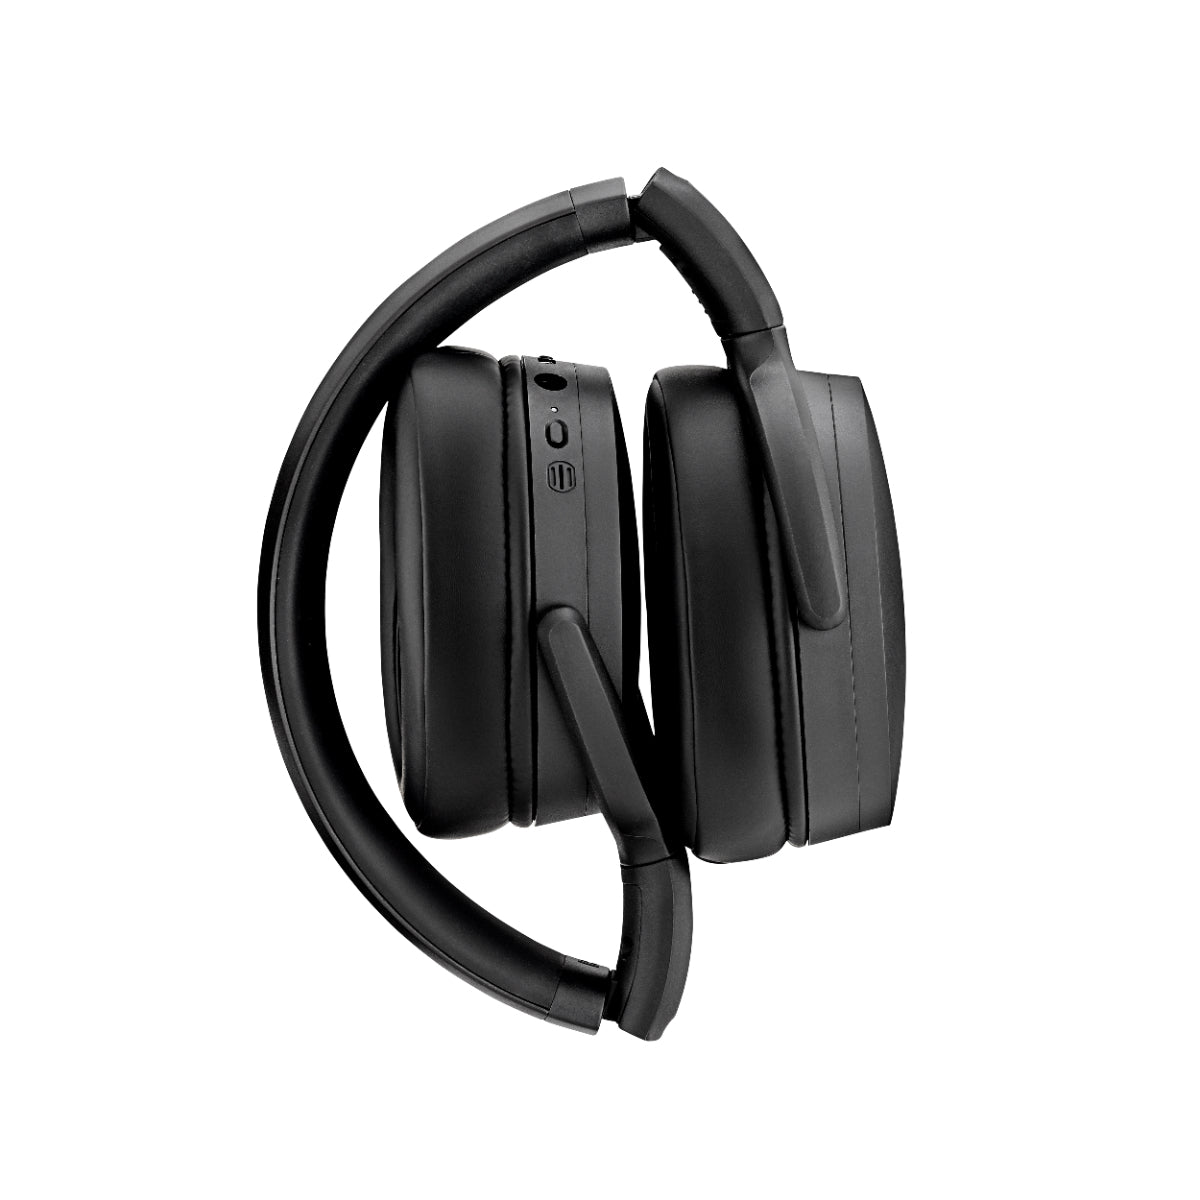 EPOS ADAPT 360 BT ANC Stereo Headset, Black, Foldable, With Dongle & Case